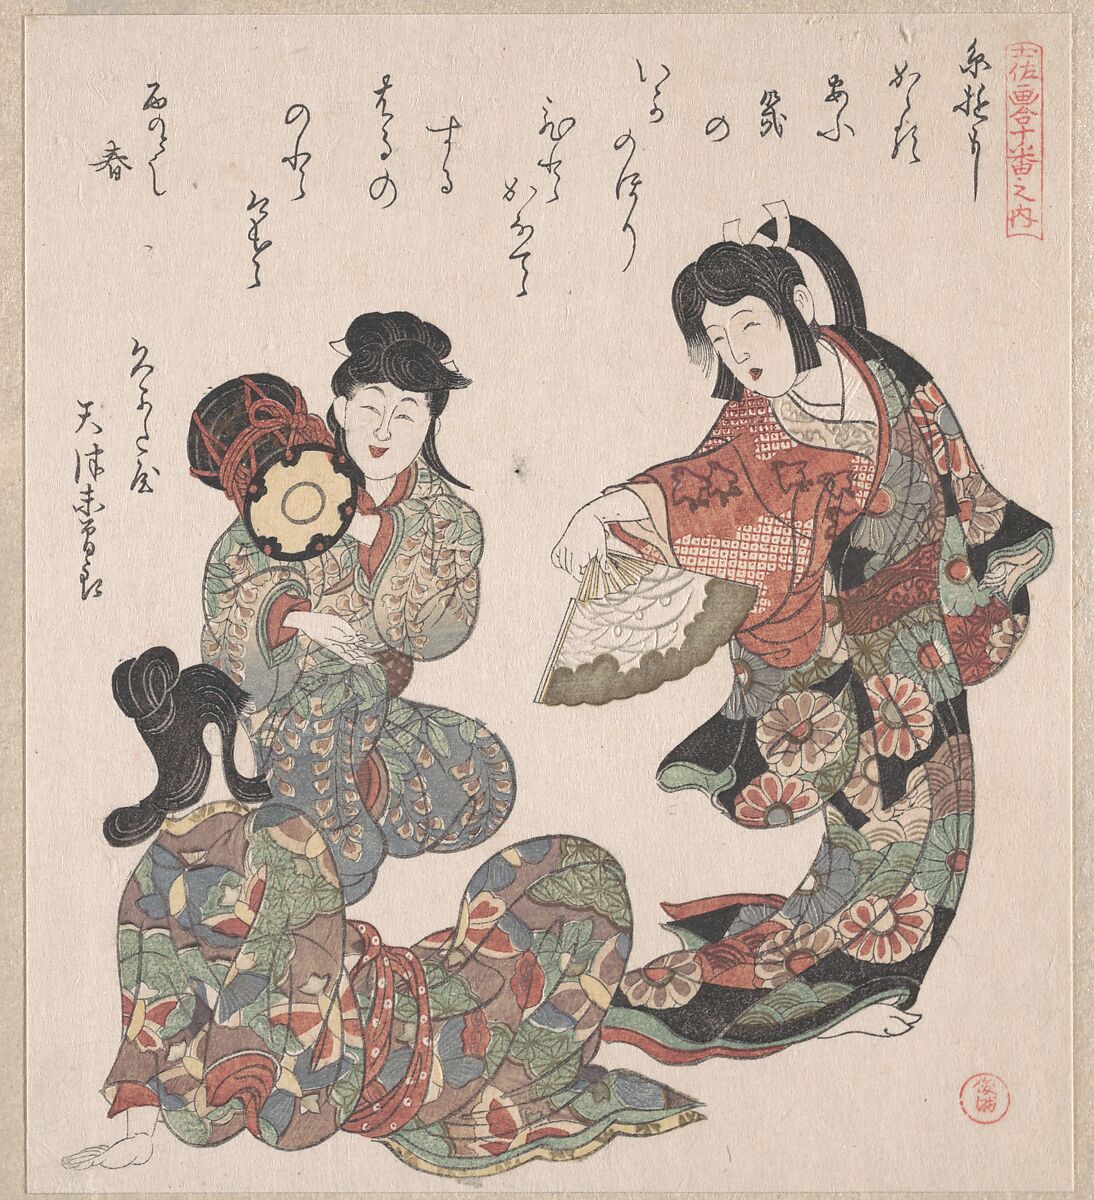 Three Girls Singing and Dancing, Kubo Shunman (Japanese, 1757–1820) (?), Part of an album of woodblock prints (surimono); ink and color on paper, Japan 